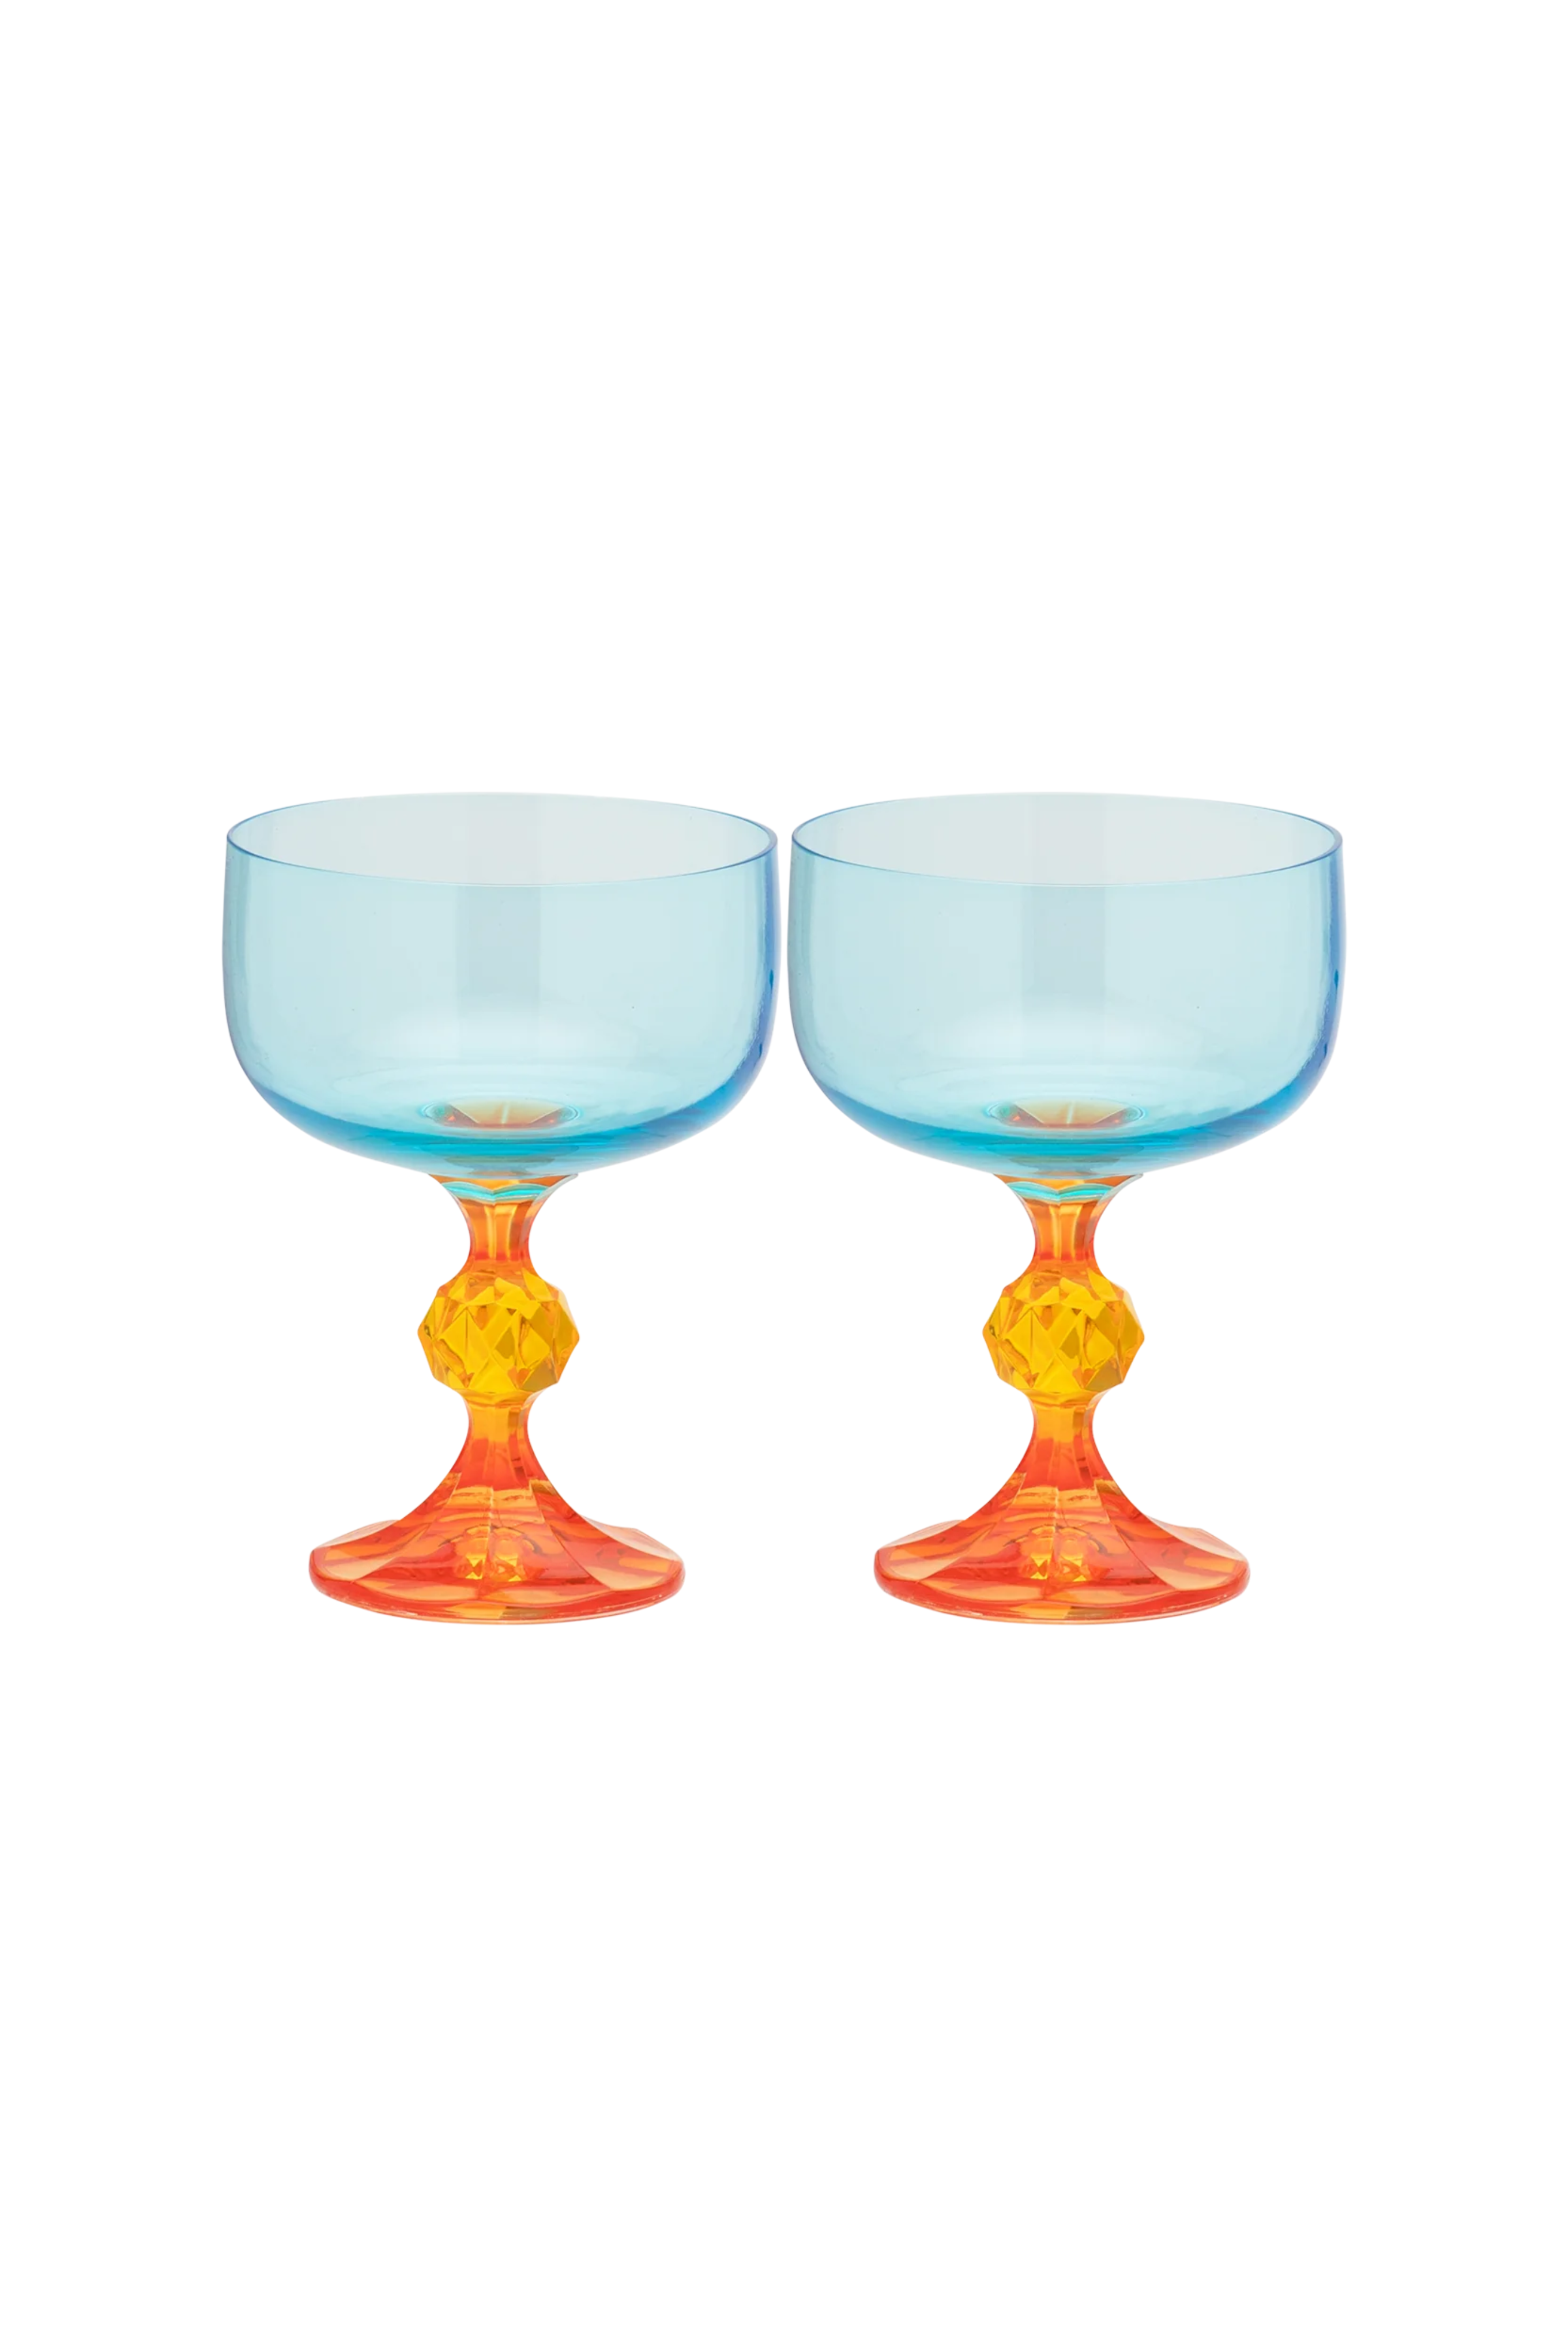 PARADISE COCKTAIL GLASS SET OF 2